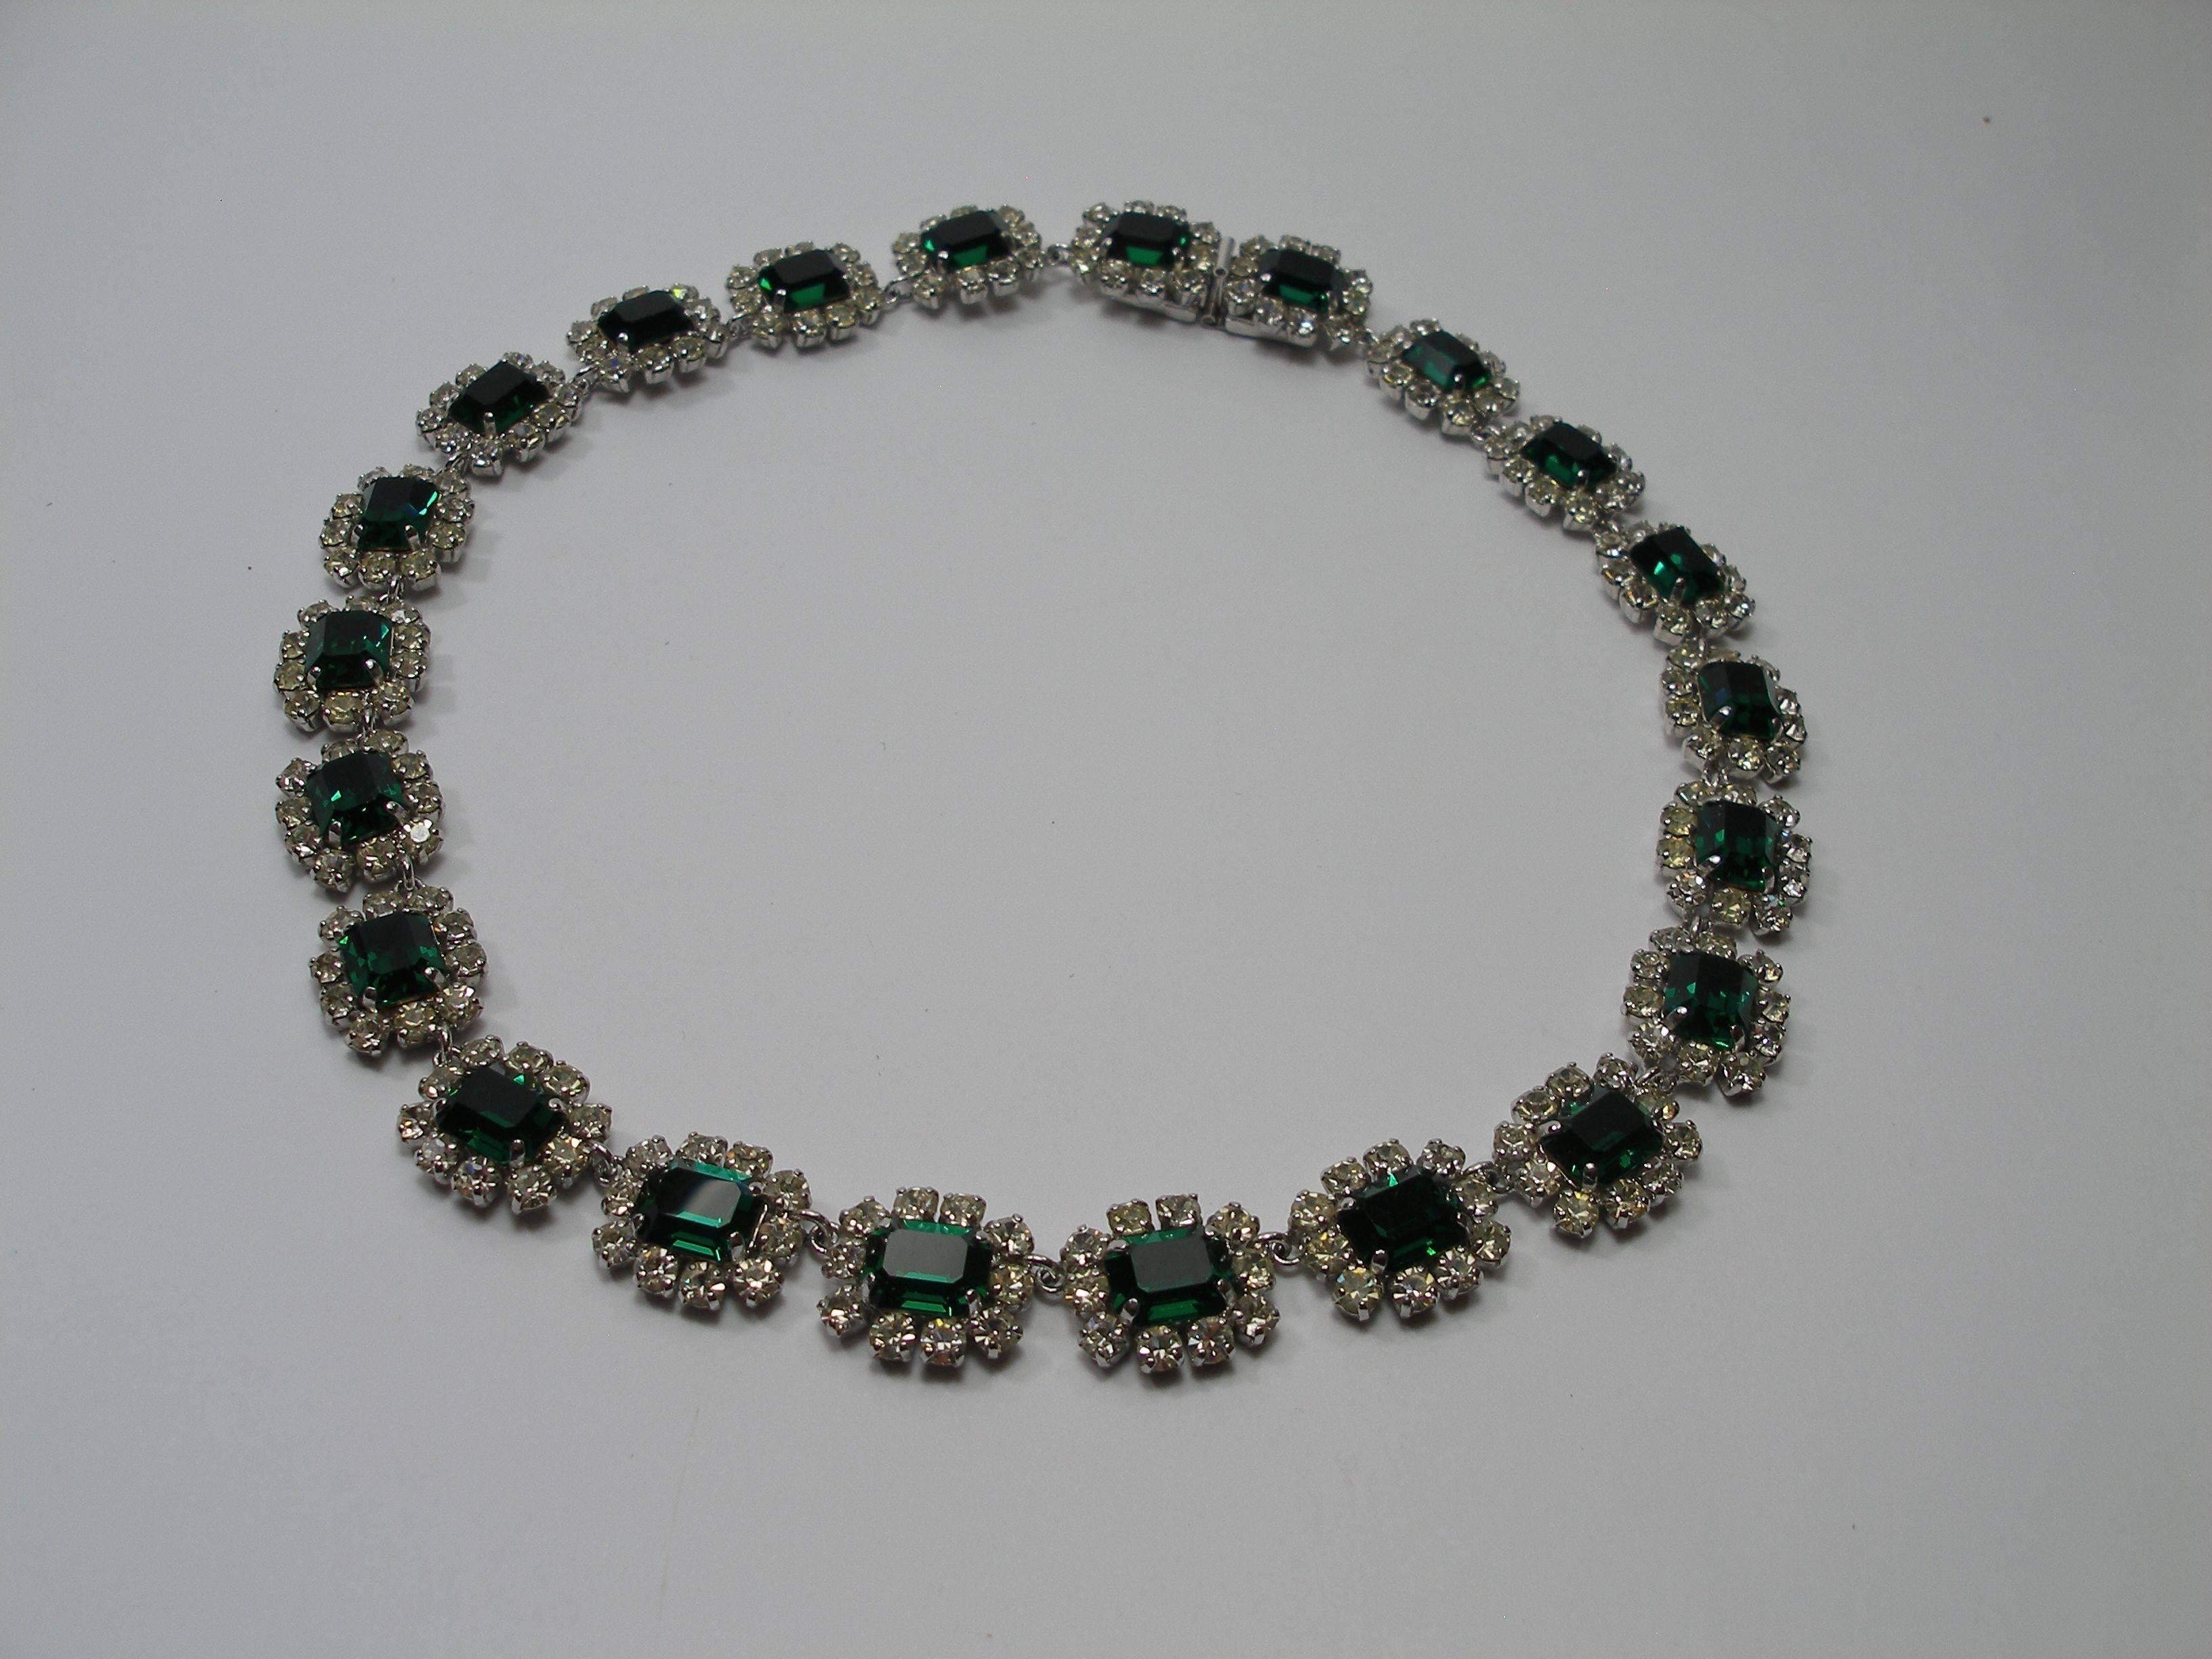 Wonderfull Dior Germany
Effet Haute Couture 
Emerald Rhinestone vintage 1966
Marked Christian Dior Germany
Lenght : 45 cm 
No box 